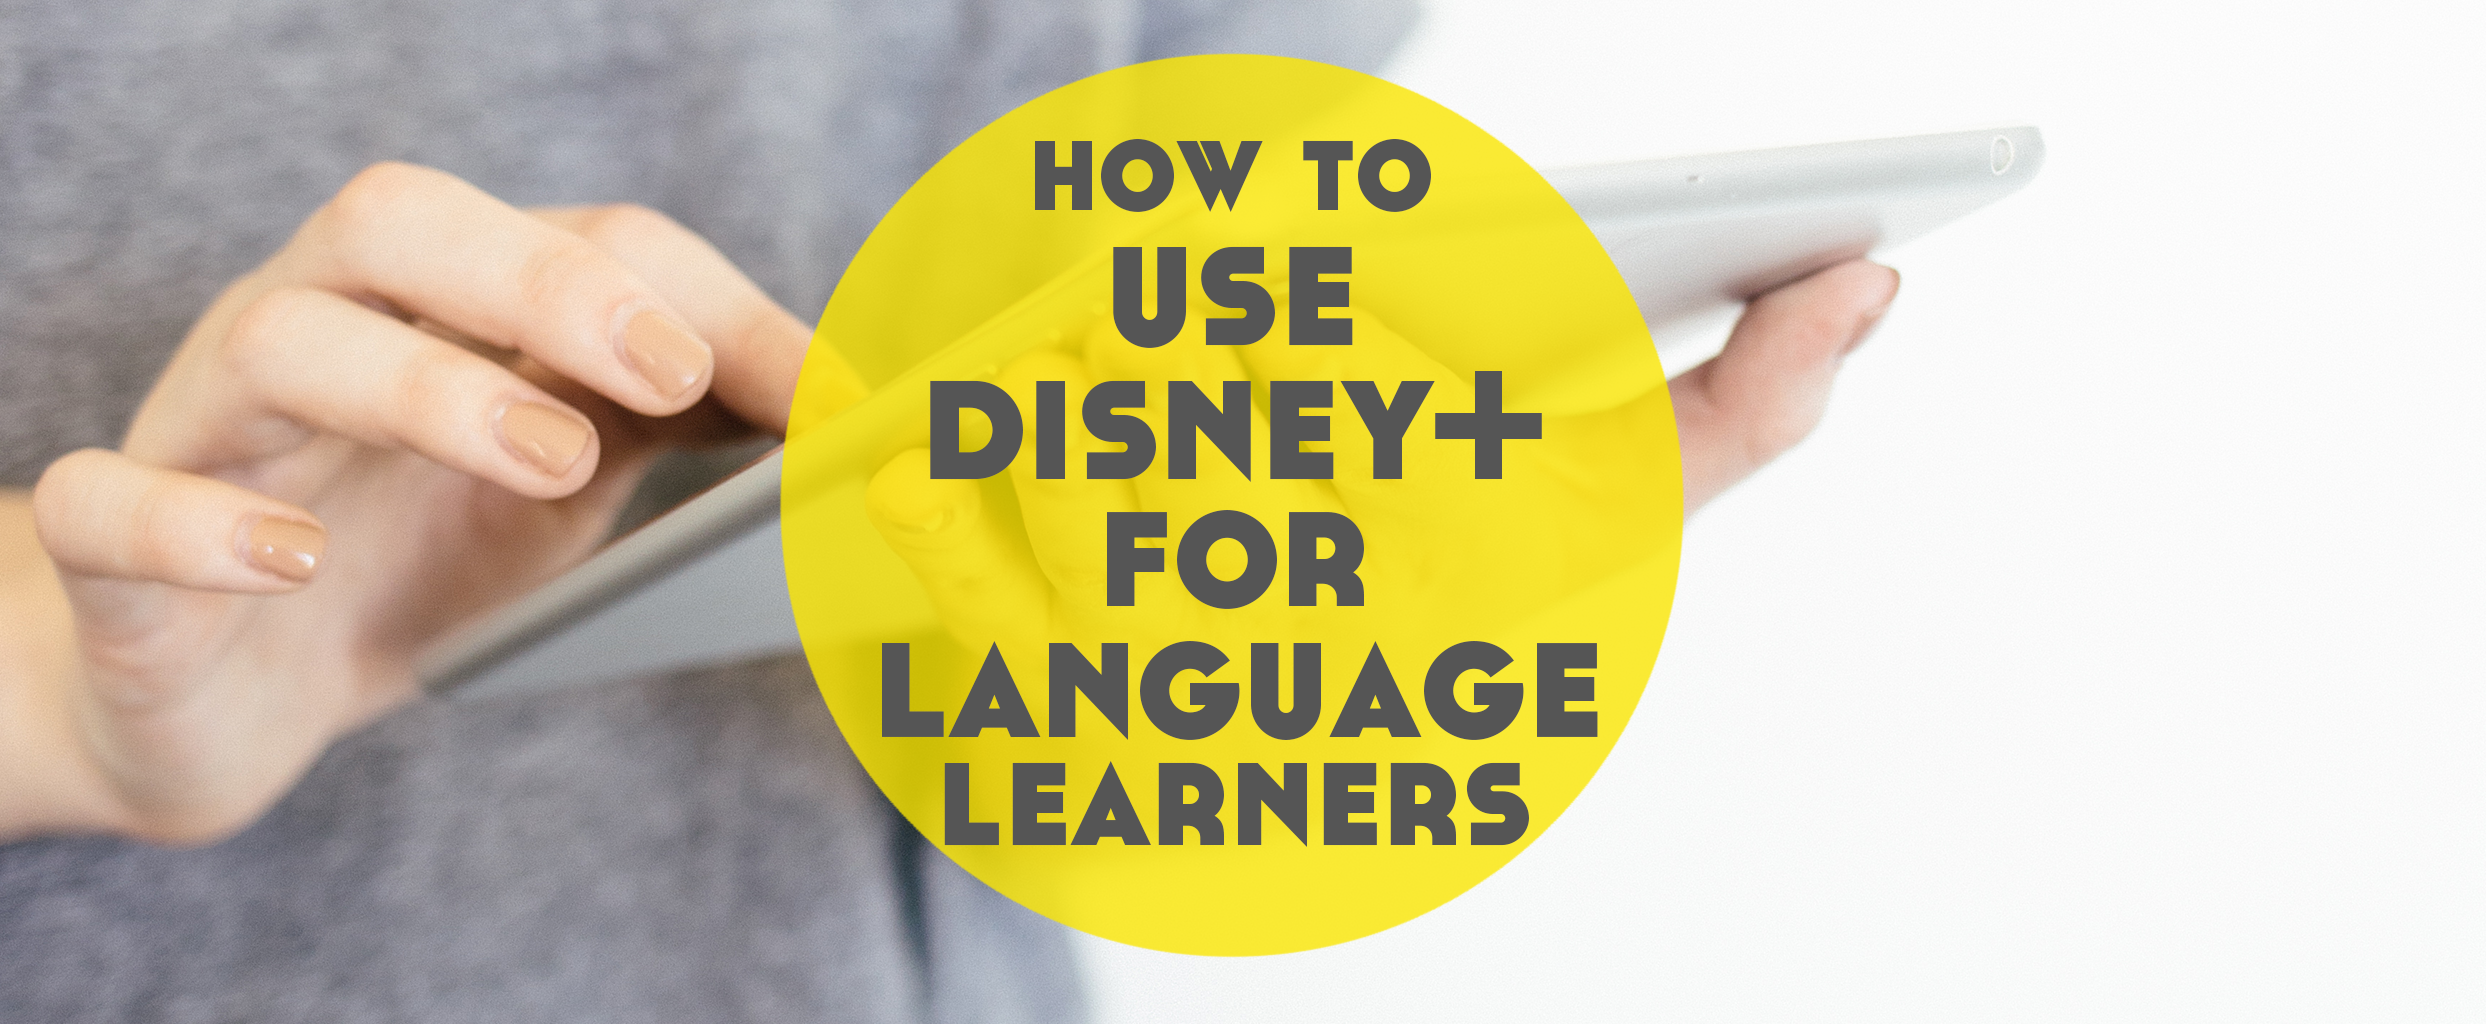 how-to-use-disney-for-language-learning-lindsay-does-languages-featured-lindsay-does-languages